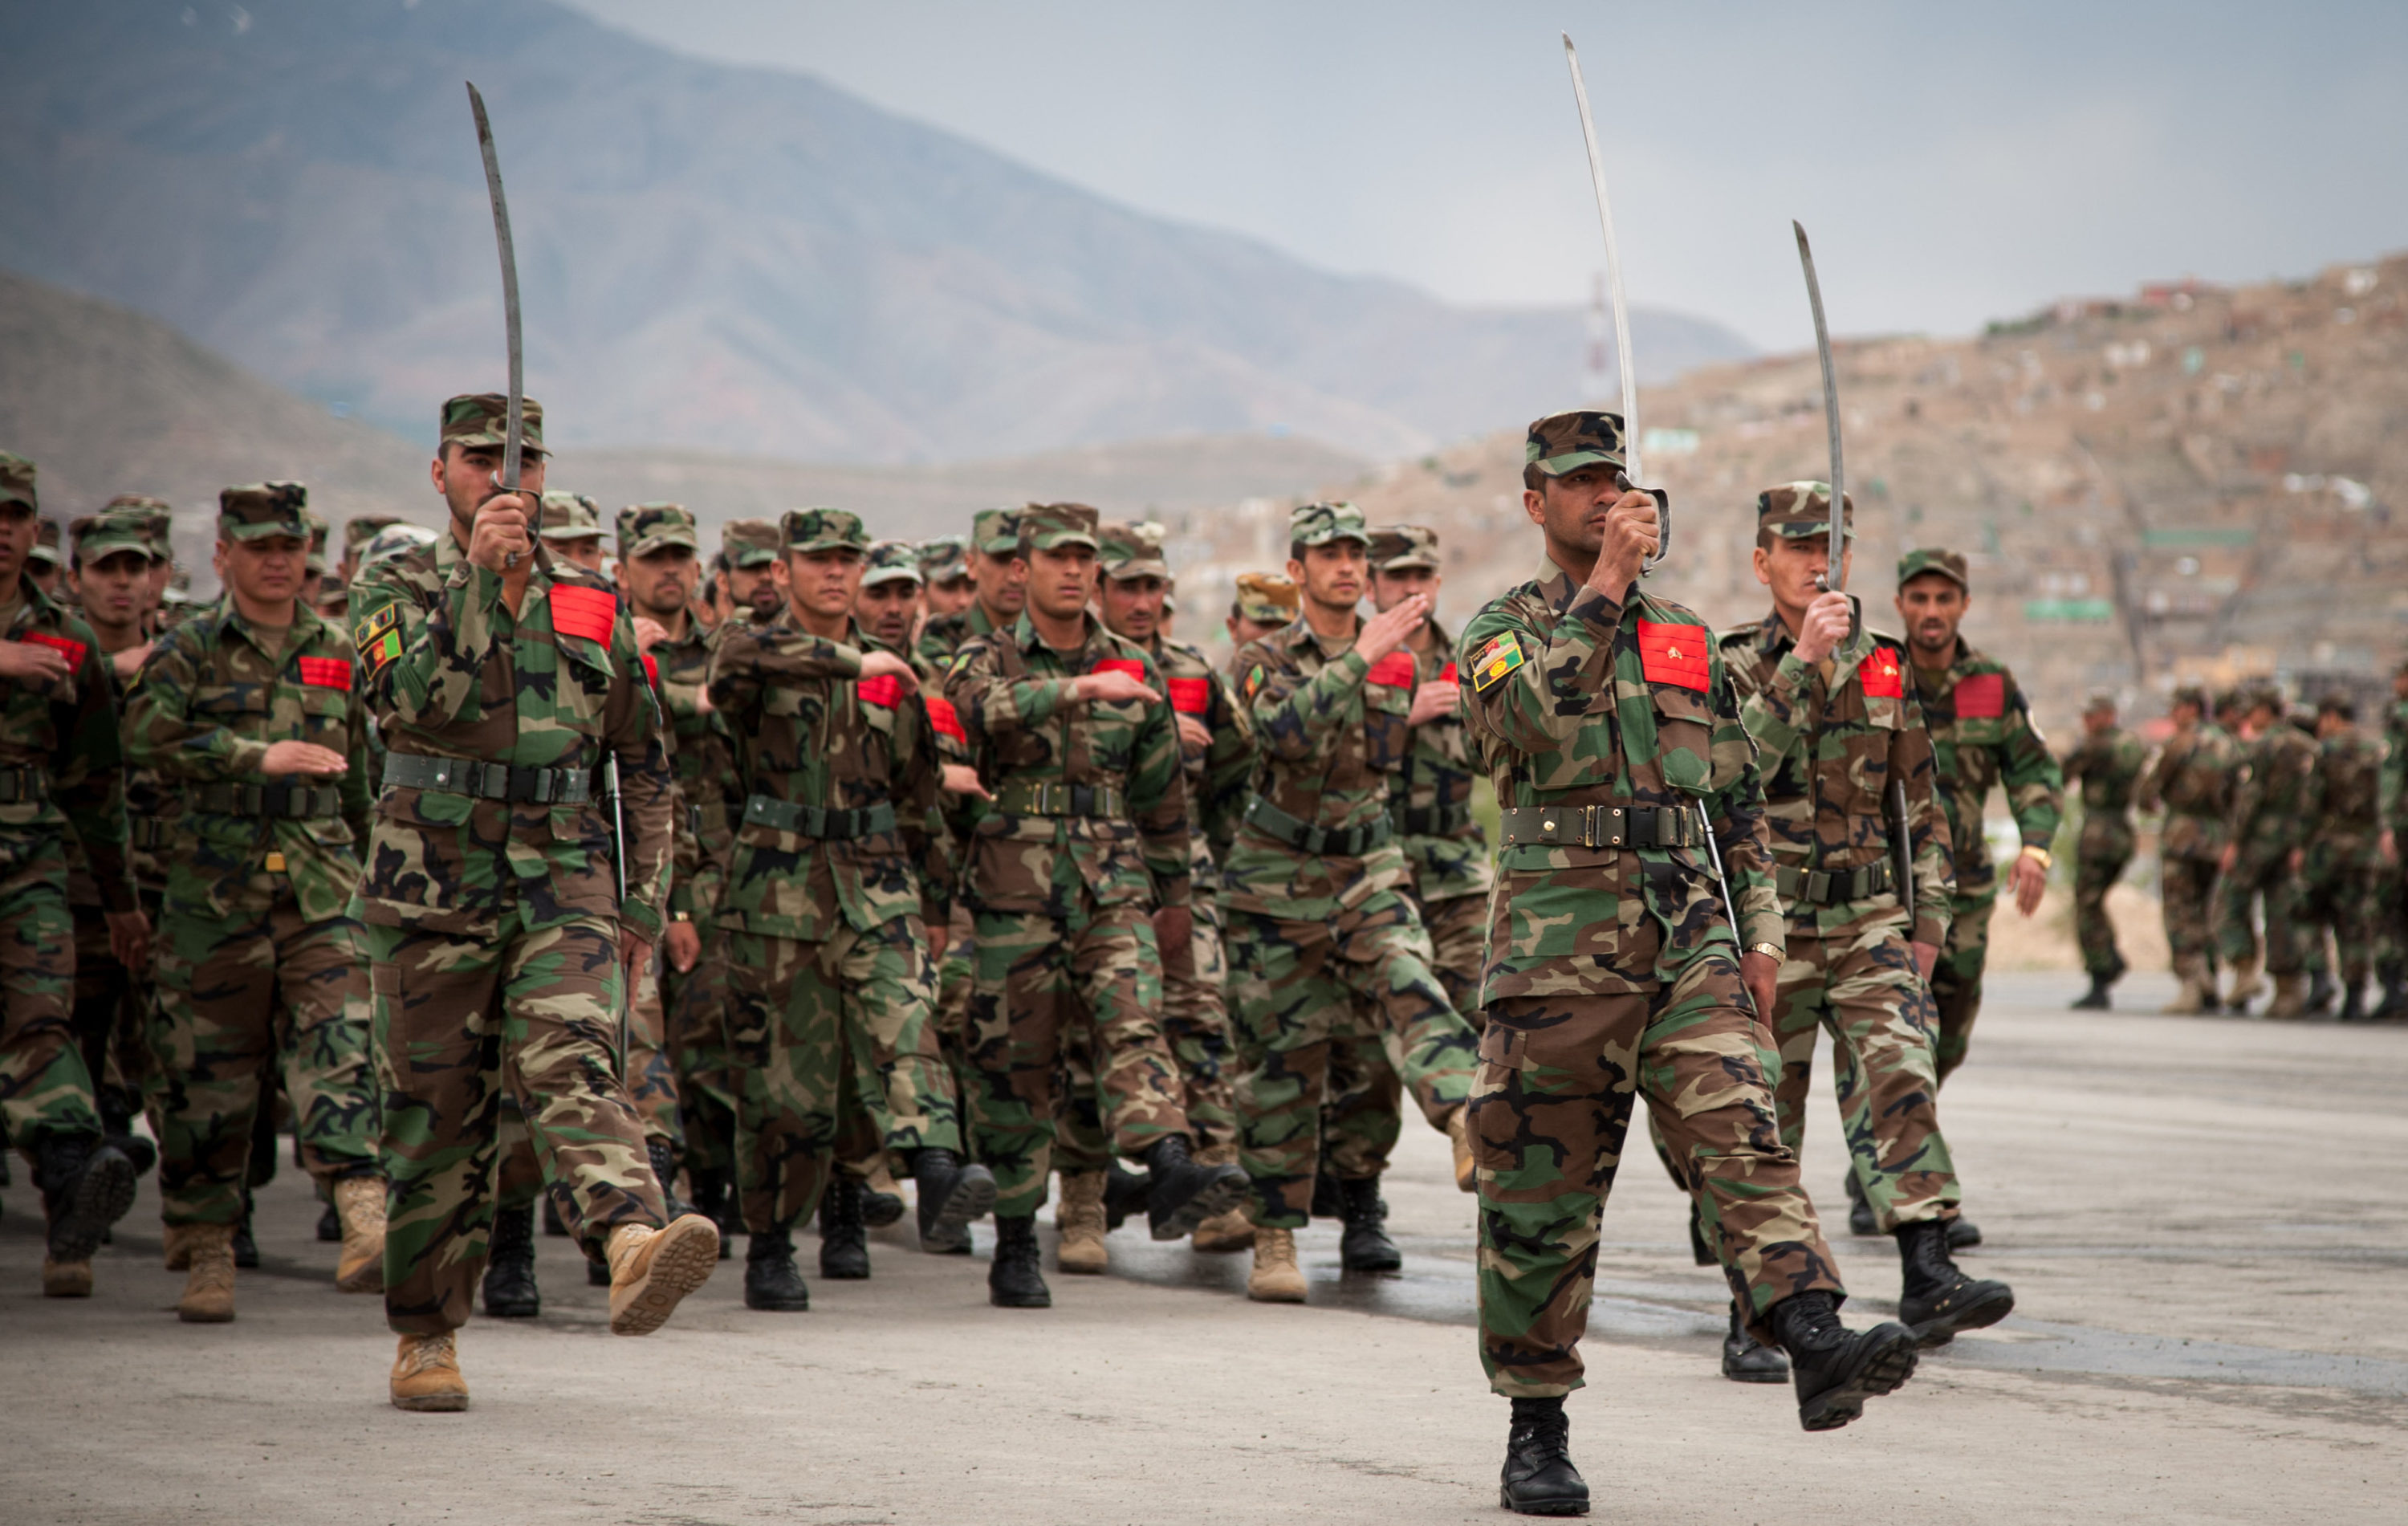 Economizing Defense: A Roadmap for Building Sustainable Afghan Security Forces